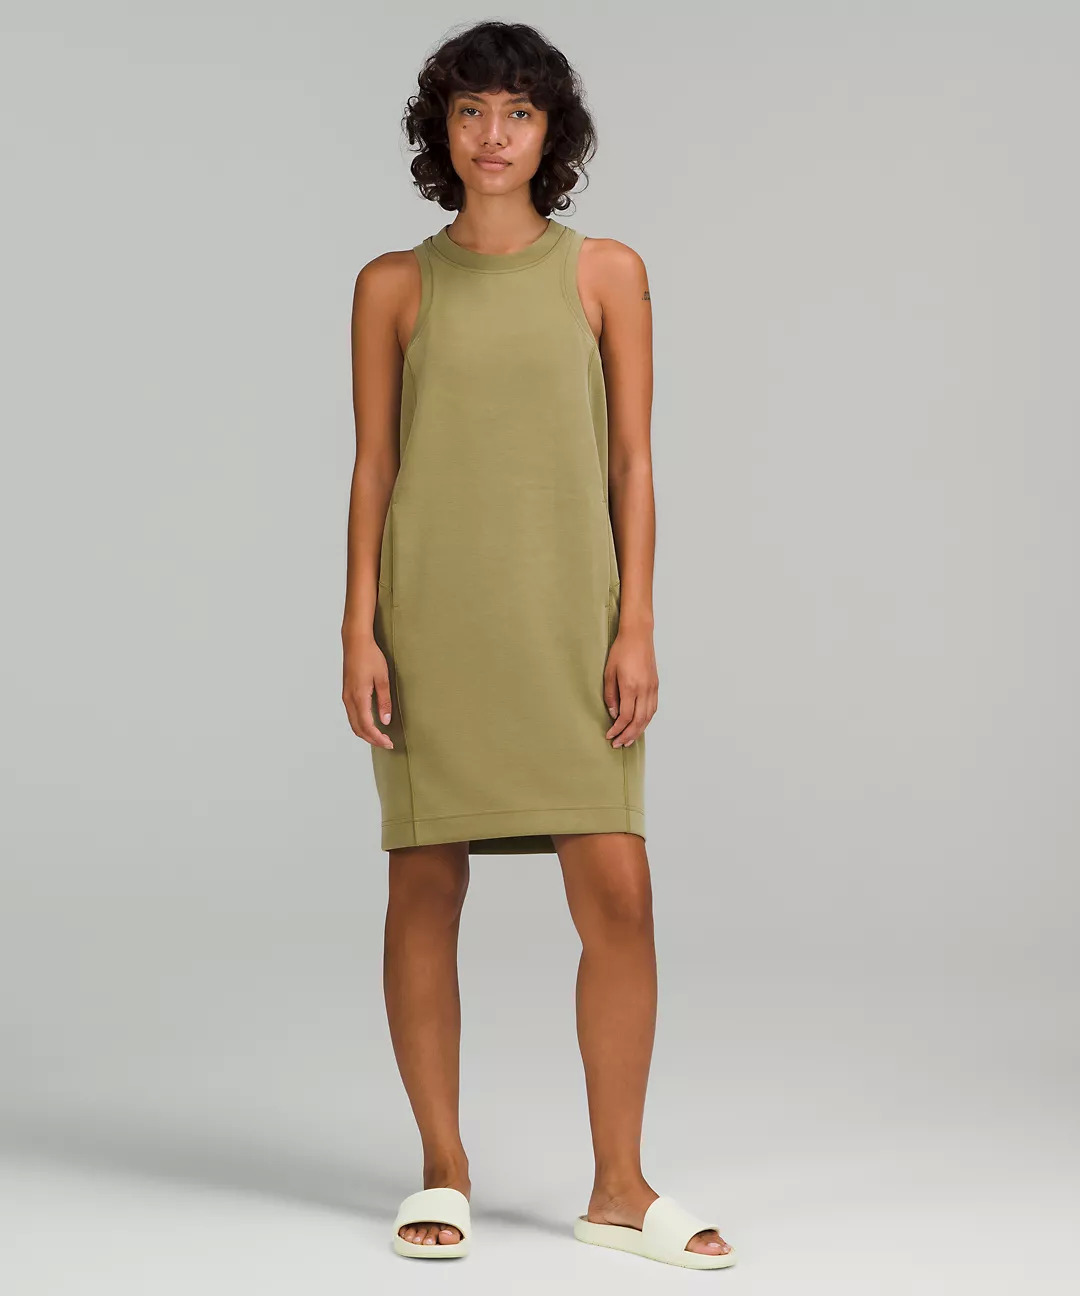 lululemon Women's Softstreme Back In Action Dress w/ Pockets (2 Colors) $59 + Free Shipping